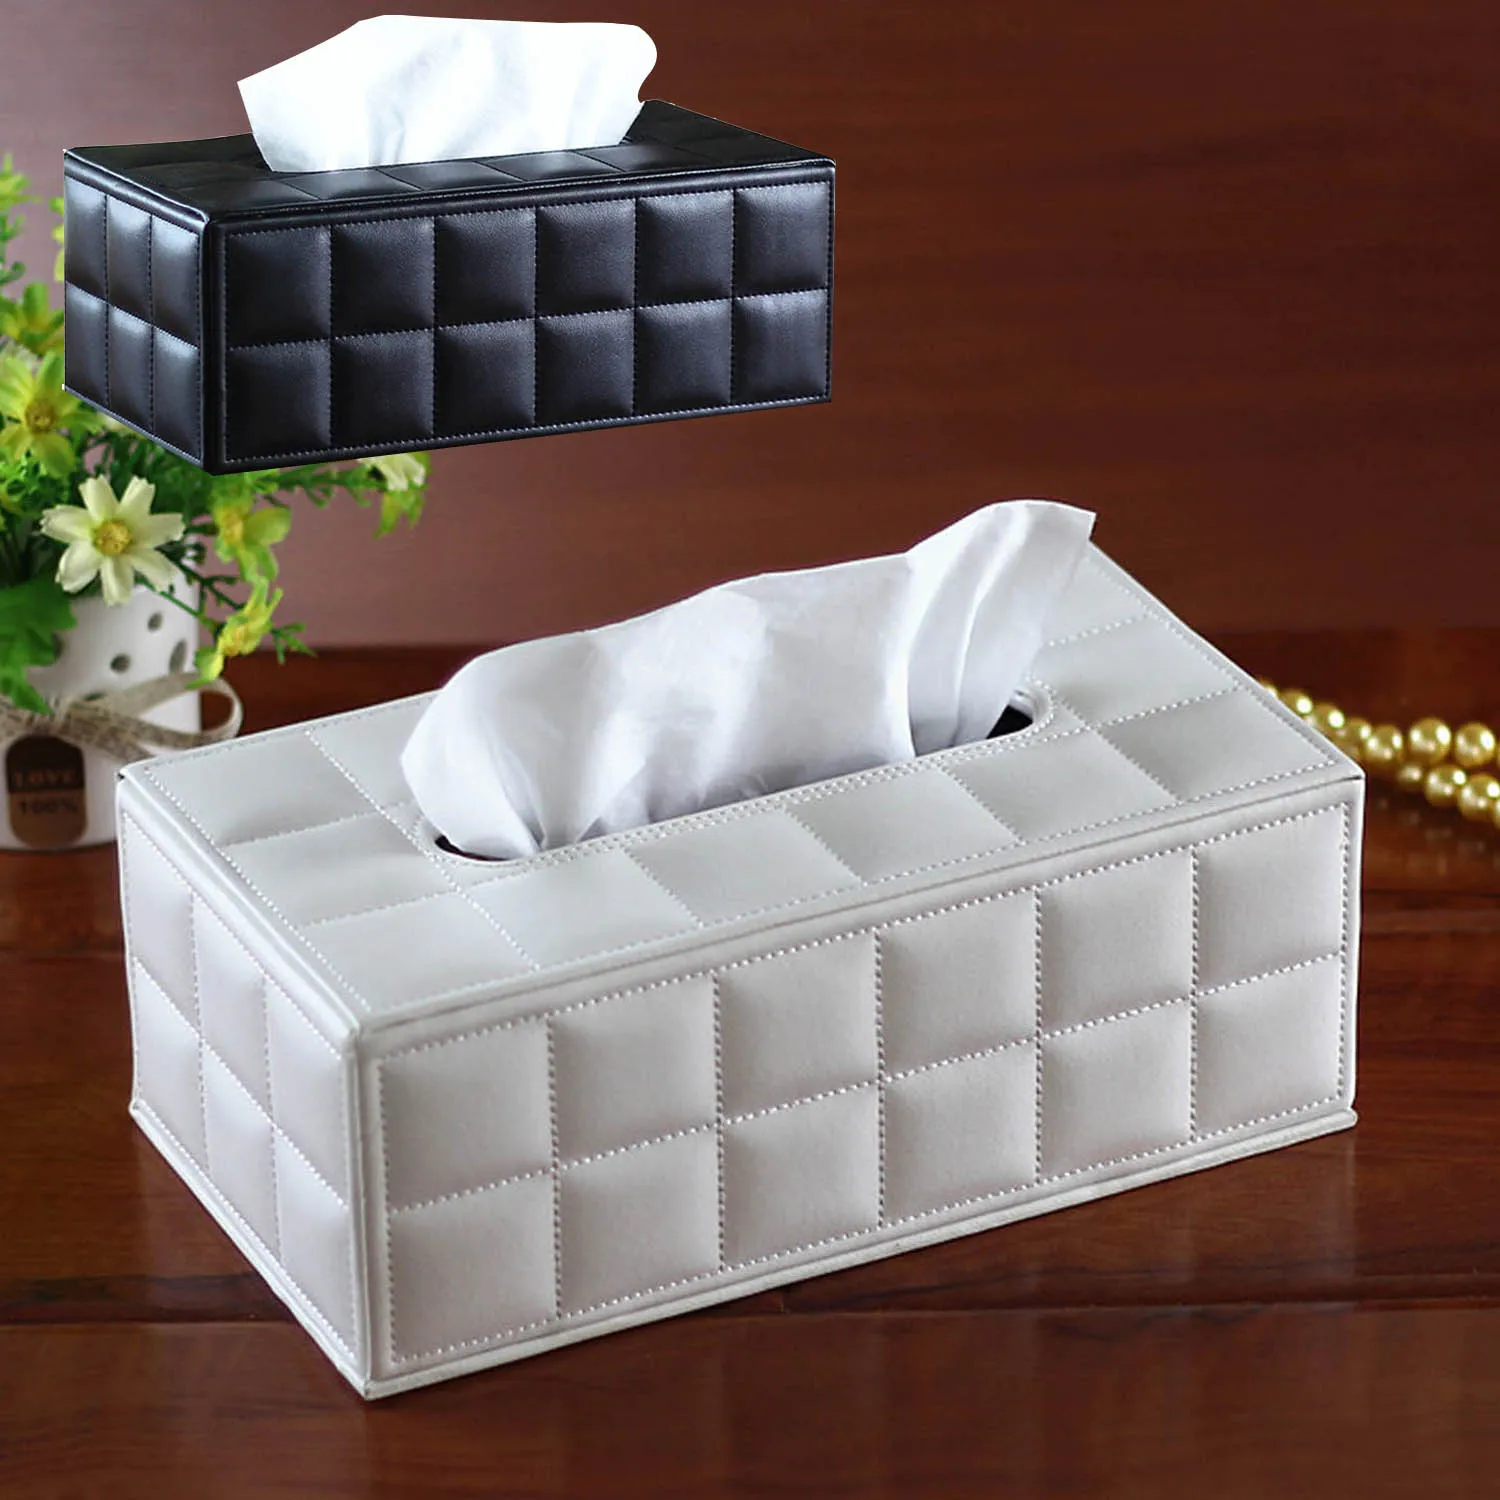 

Behogar Facial Tissue Box Cover PU Leather Hotel Car Rectangle Container Towel Napkin Tissue Case Holder Home Office Supplies